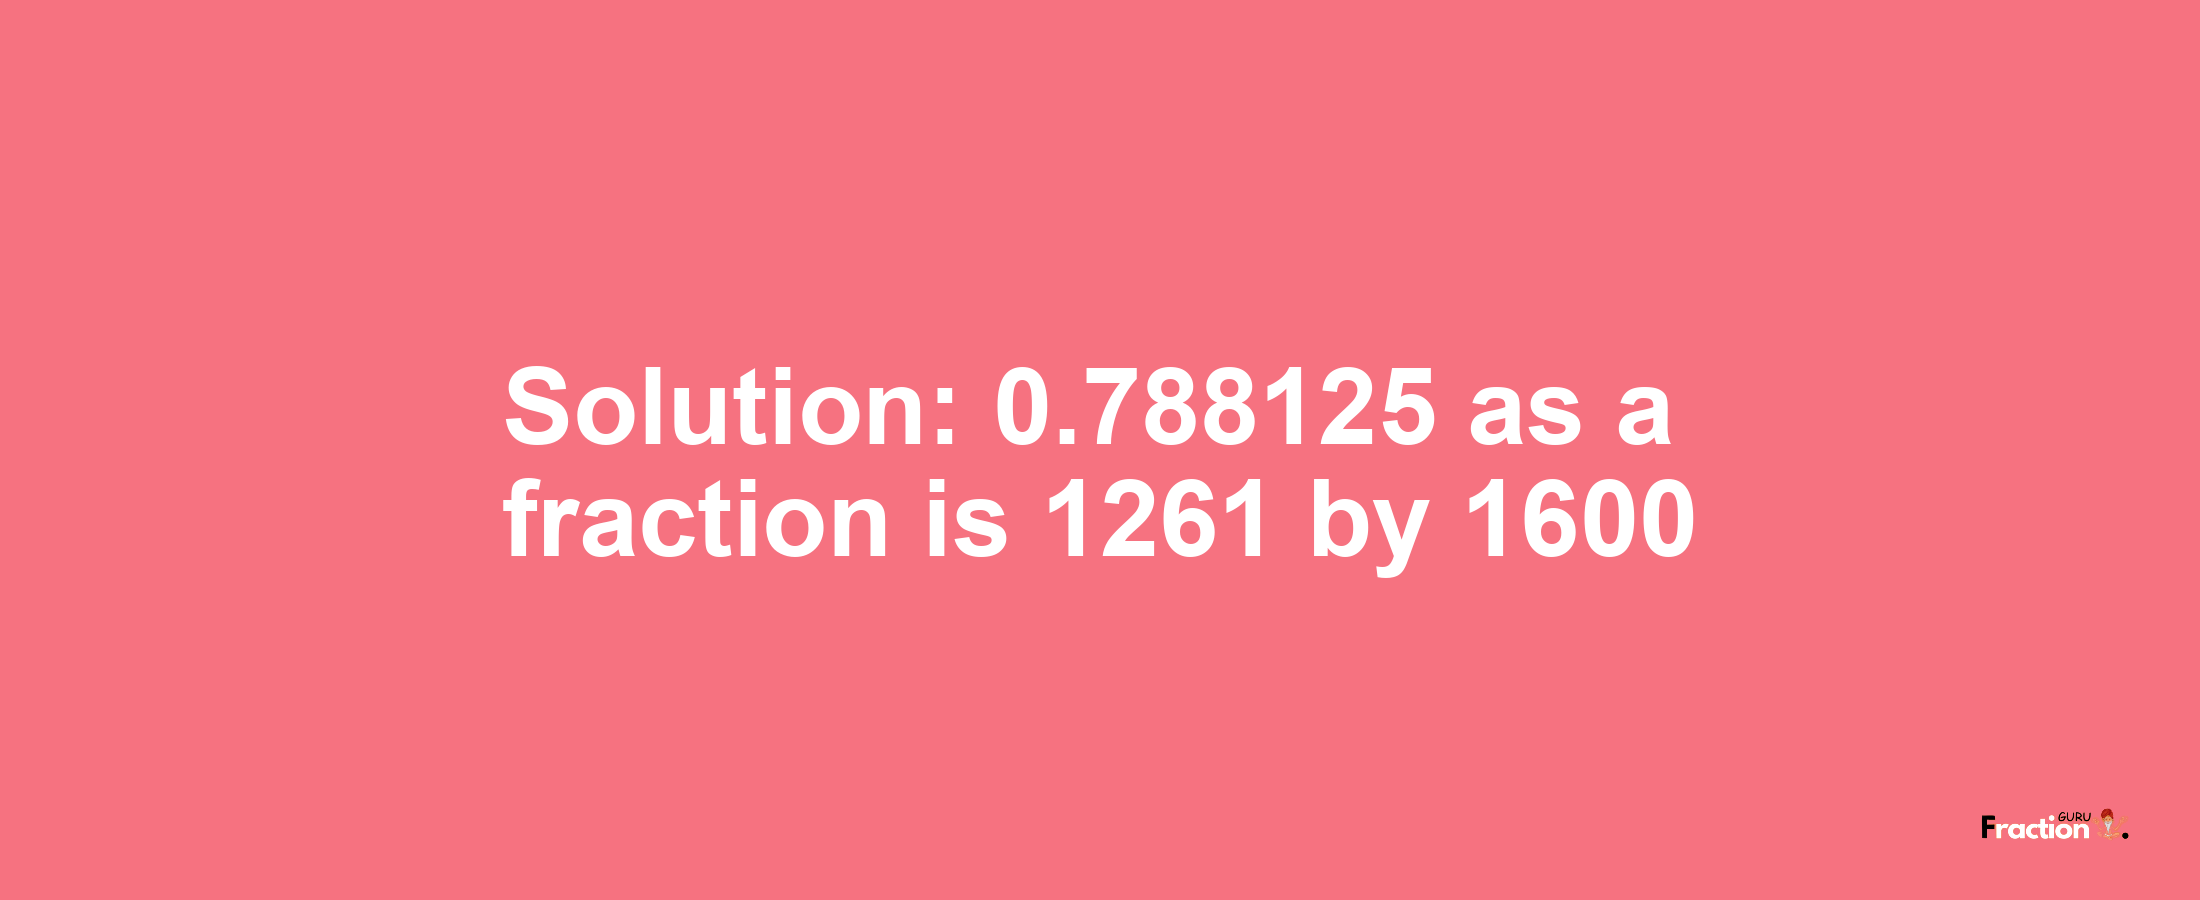 Solution:0.788125 as a fraction is 1261/1600